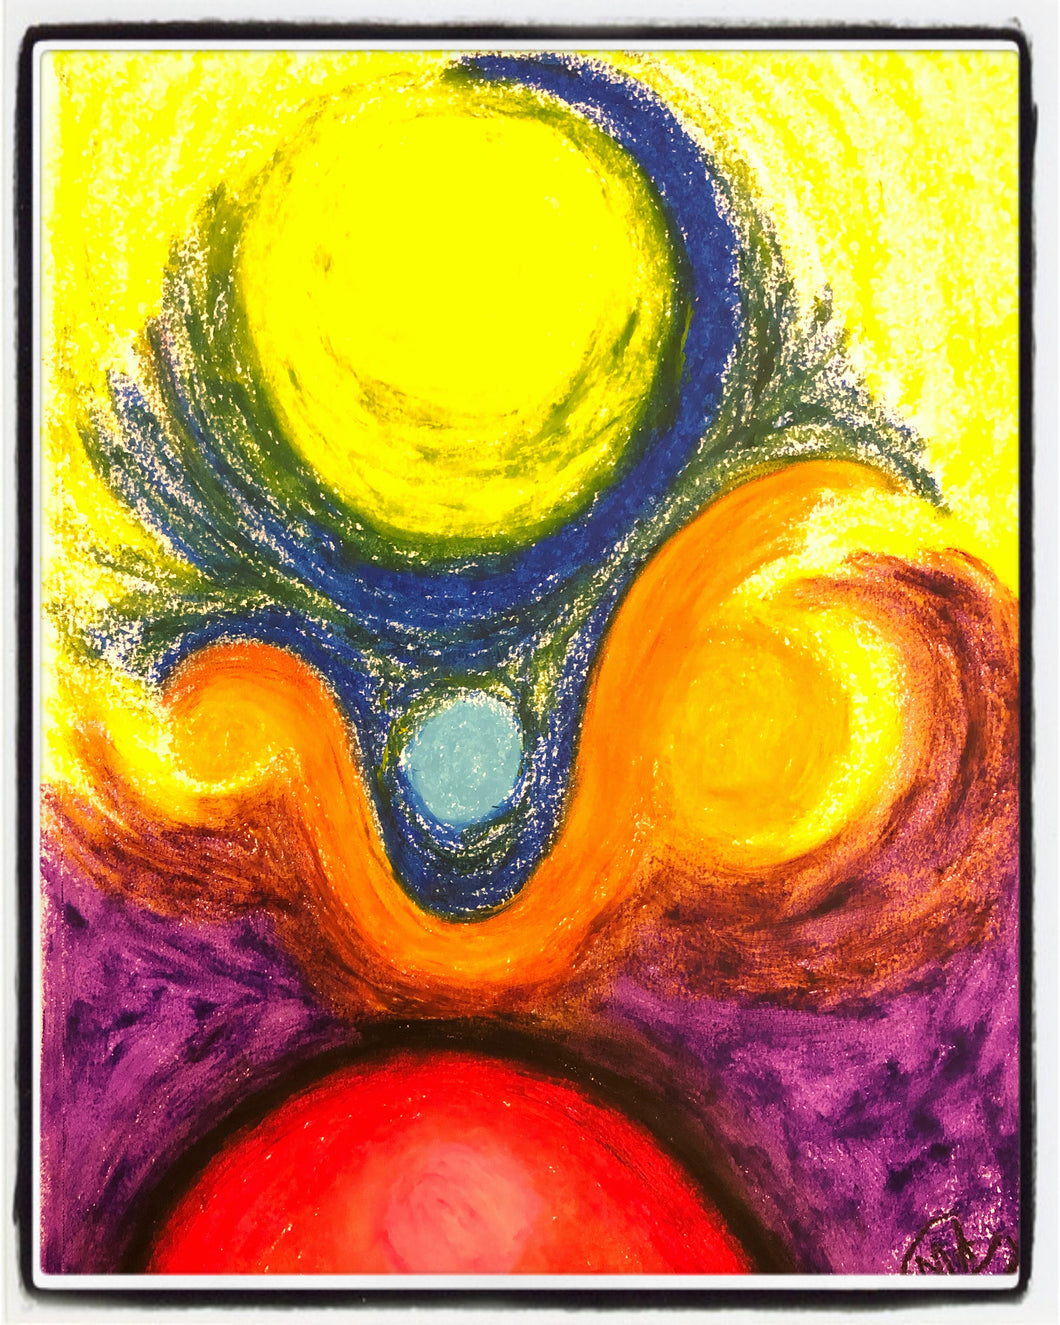 Velvet Fine Art Print “Playing with pastel🌞 dancing planets or ovaries ♥️ maybe they are the same...